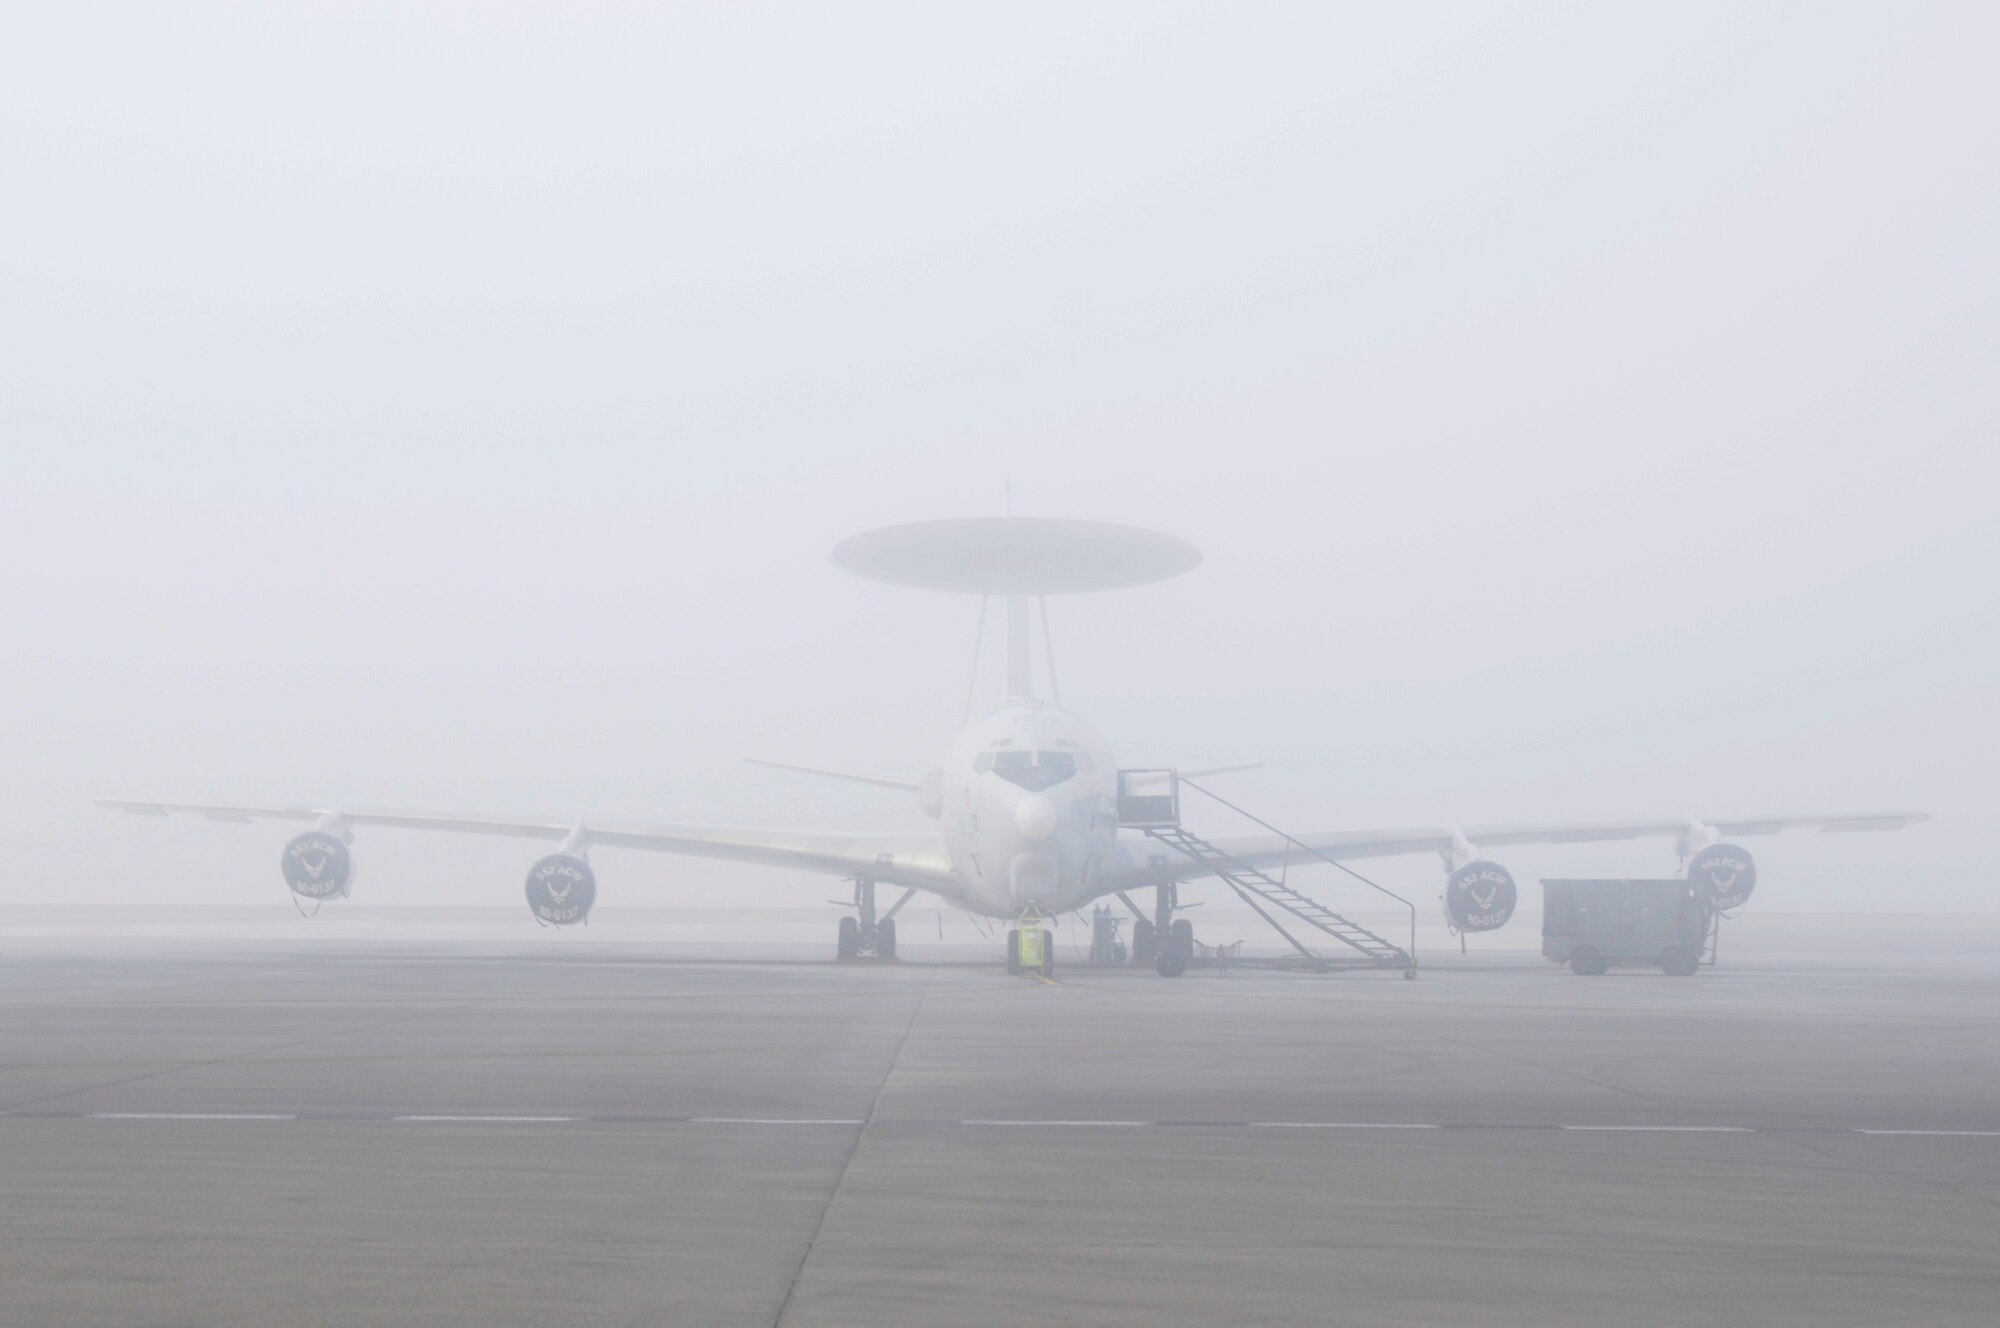 SOUTHWEST ASIA - An E-3 Sentry sits on the flightline at the 380th Air Expeditionary Wing as the sun breaks through on a foggy morning, Jan 28. The 380th AEW keeps all aircraft ready to fly in any weather condition. The E-3 Sentry is at the 380th from Tinker AFB, Okla.  (U.S. Air Force photo by Senior Airman Brian J. Ellis) (Released)